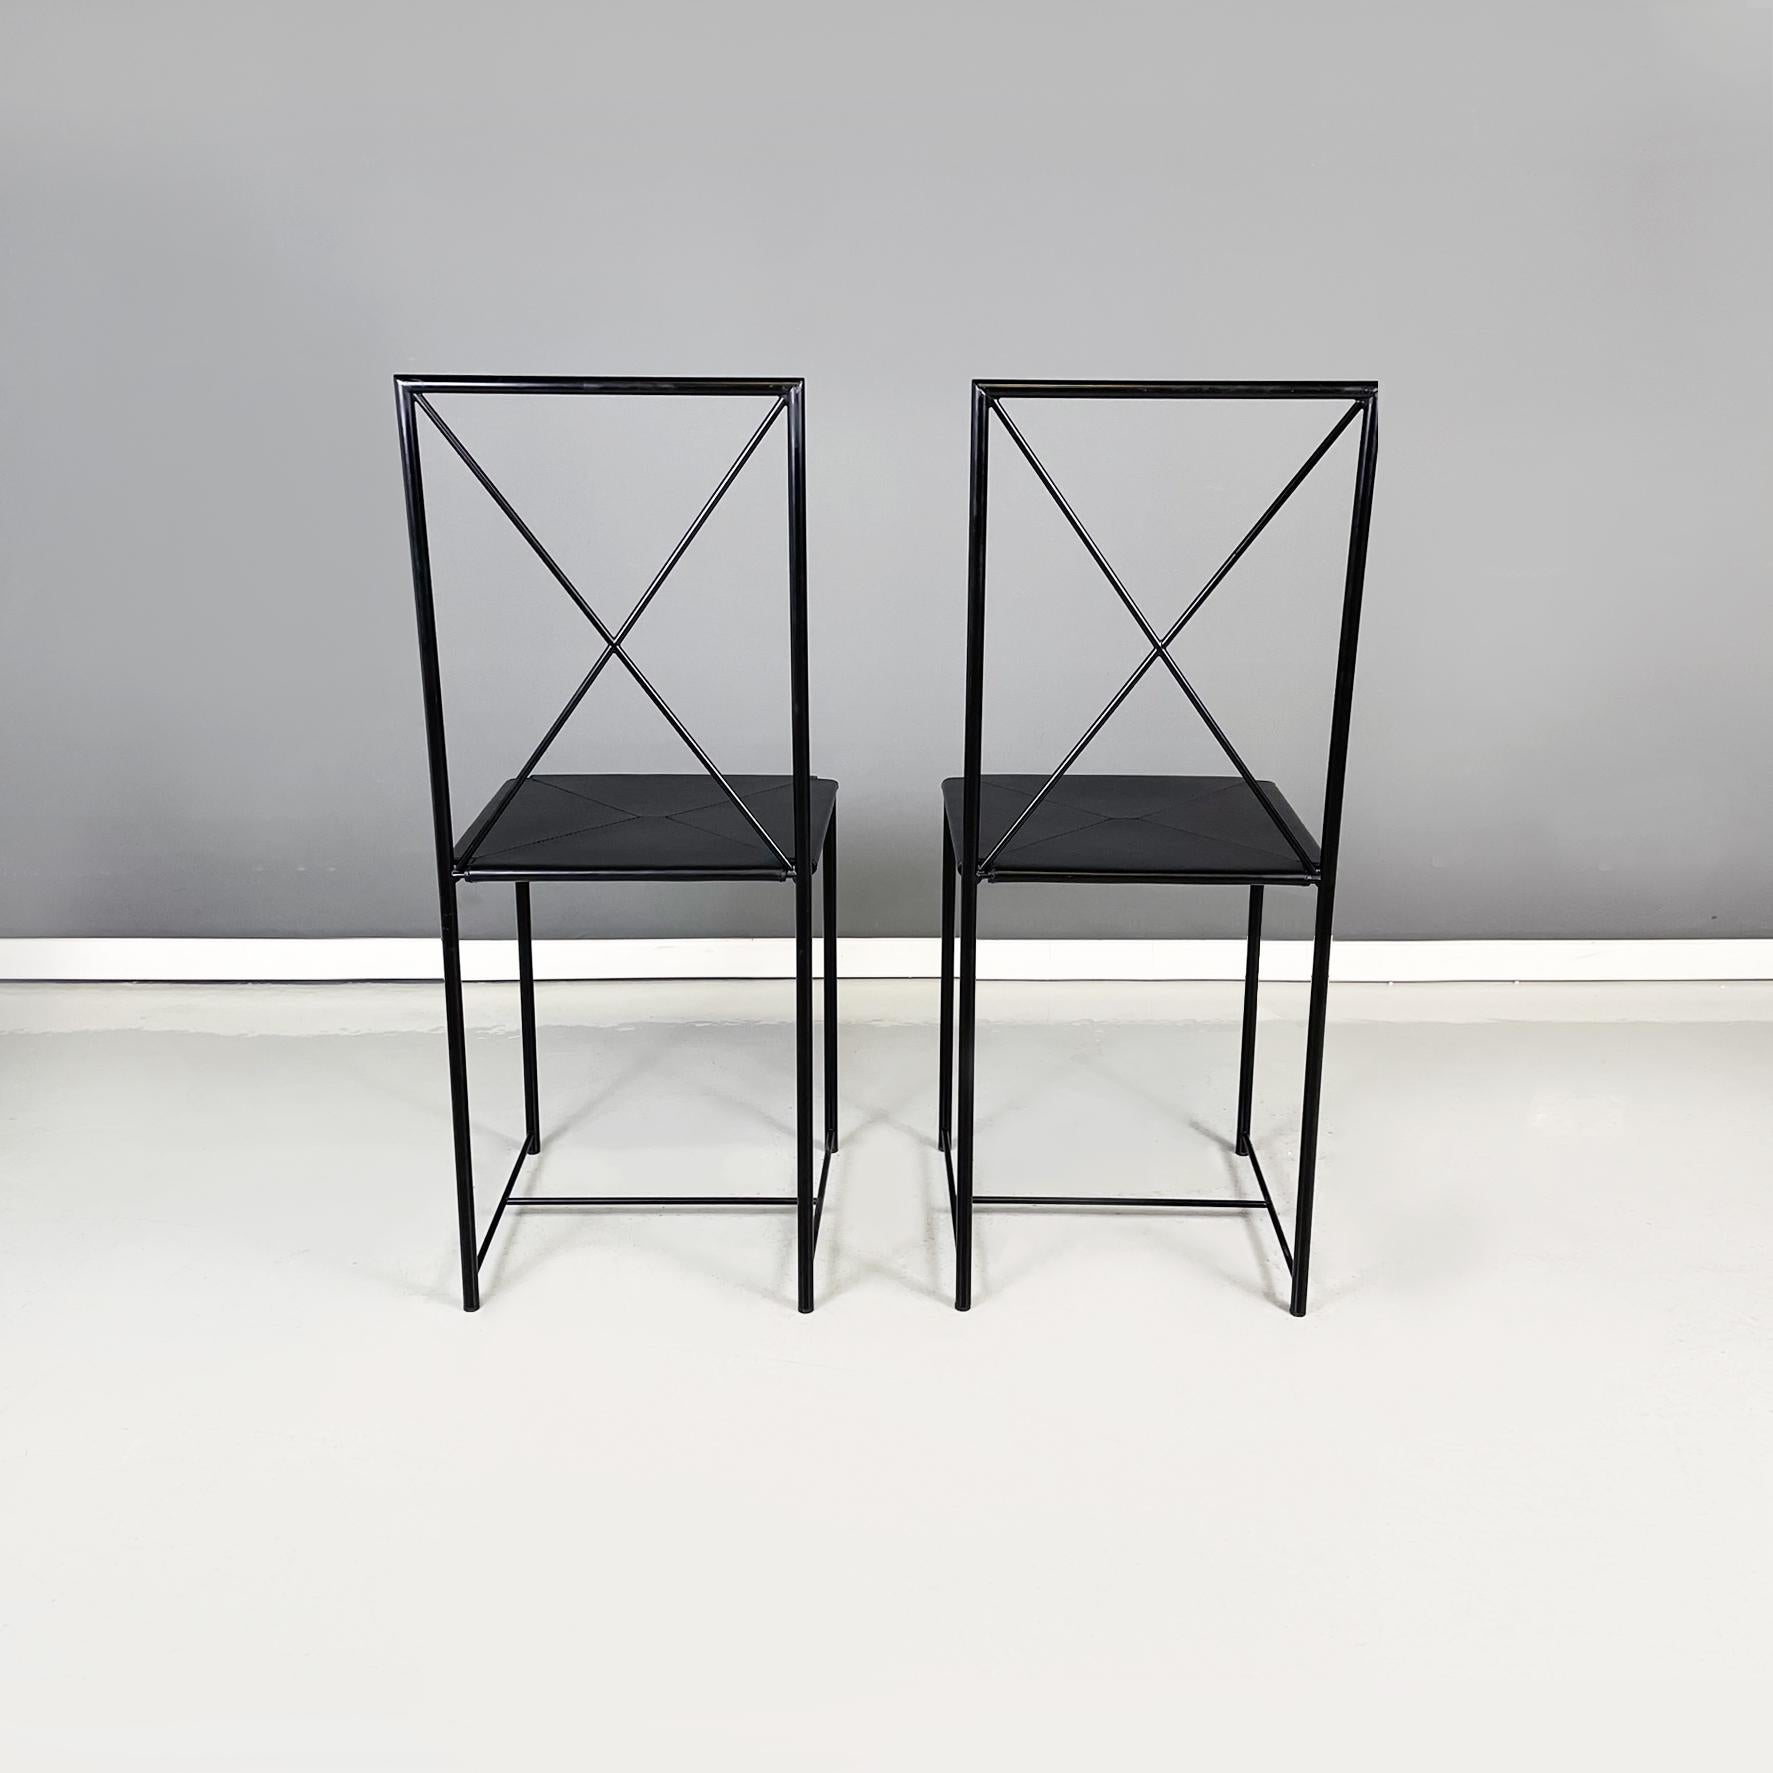 Late 20th Century Italian Modern Black Metal Leather Chairs Moka by Asnago Vender Flexoform, 1939 For Sale